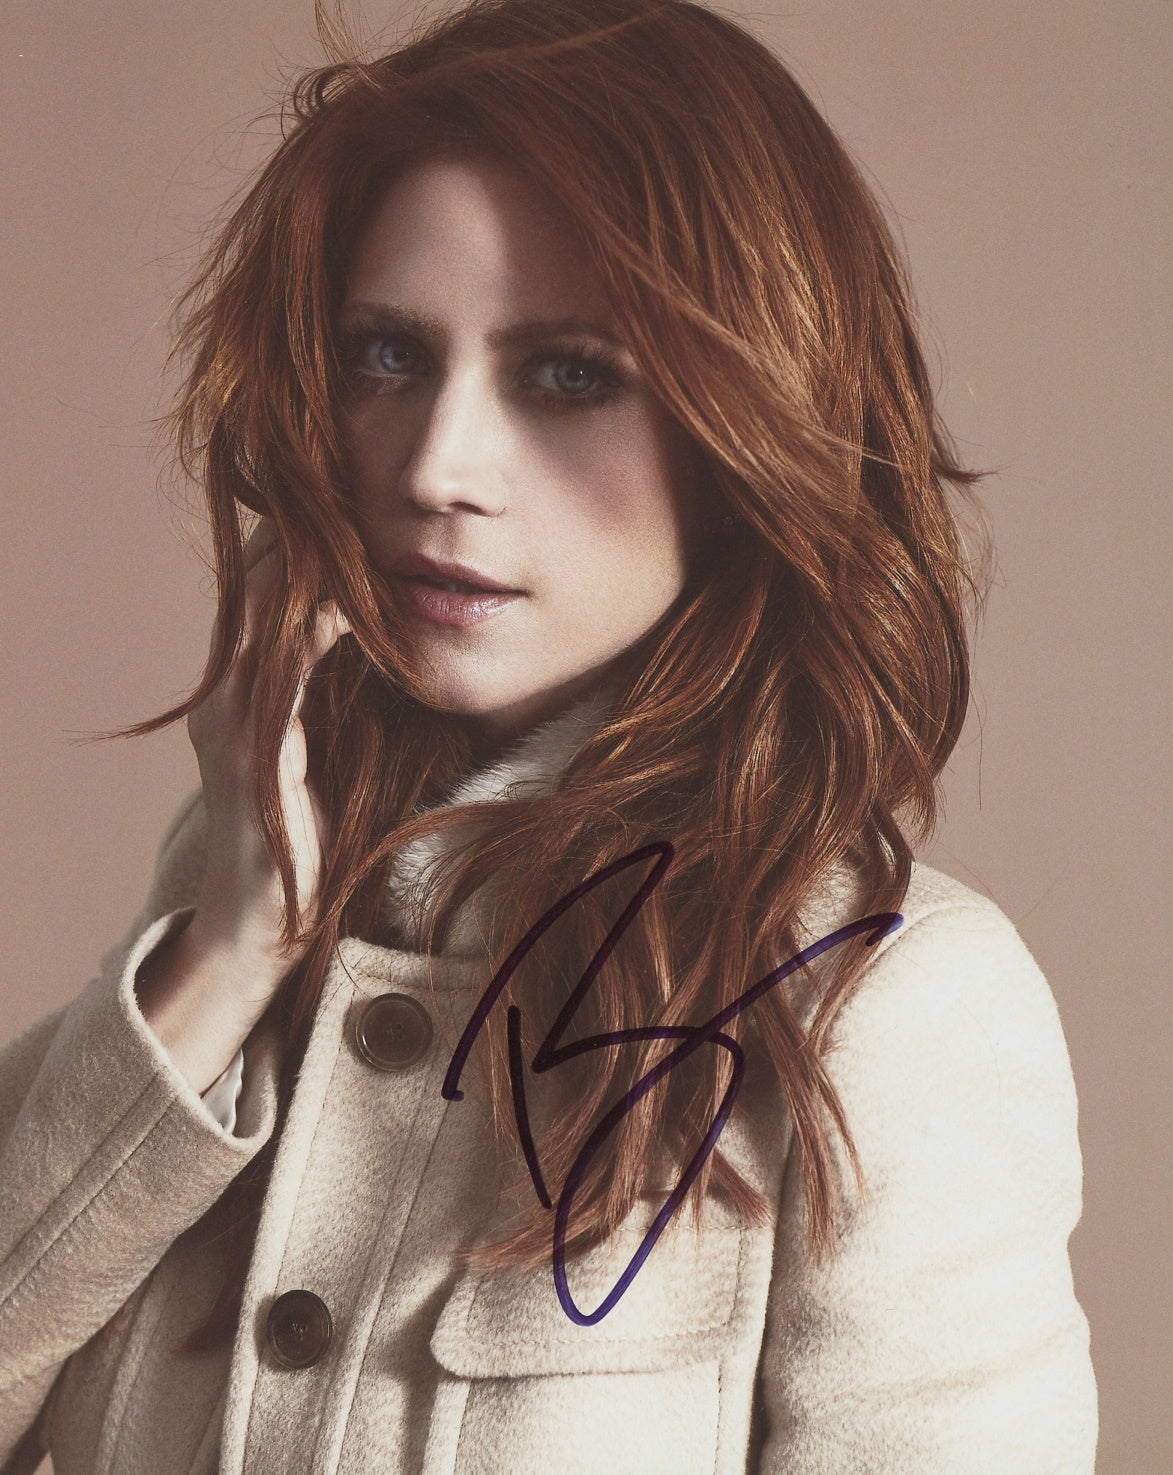 Brittany Snow Signed 8x10 Photo